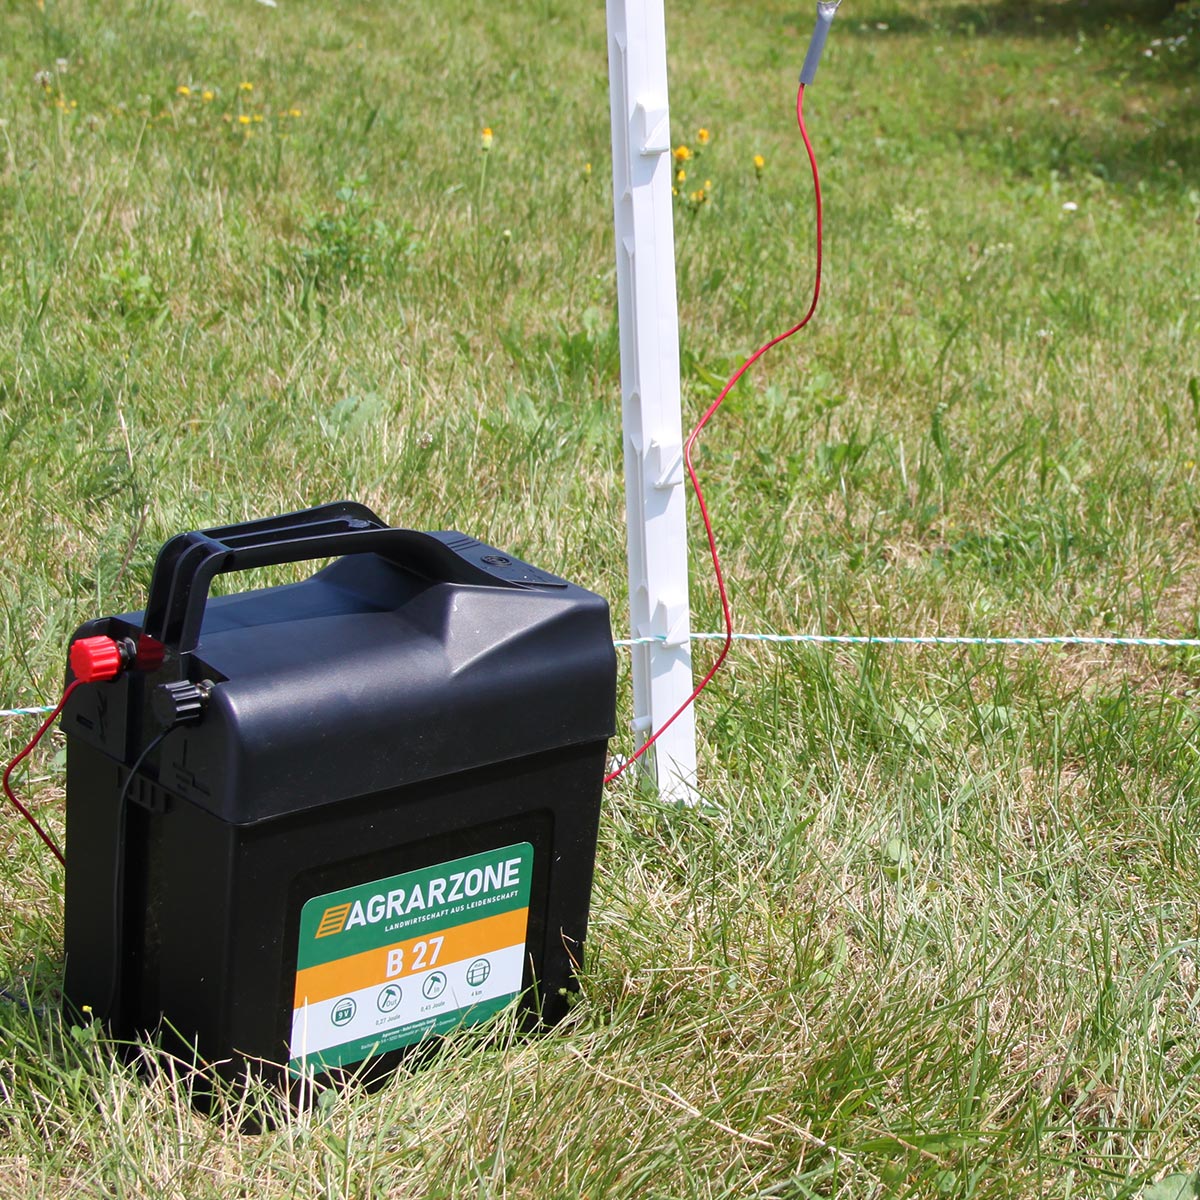 Agrarzone B27 electric fence energiser 9V, 0,45 joules